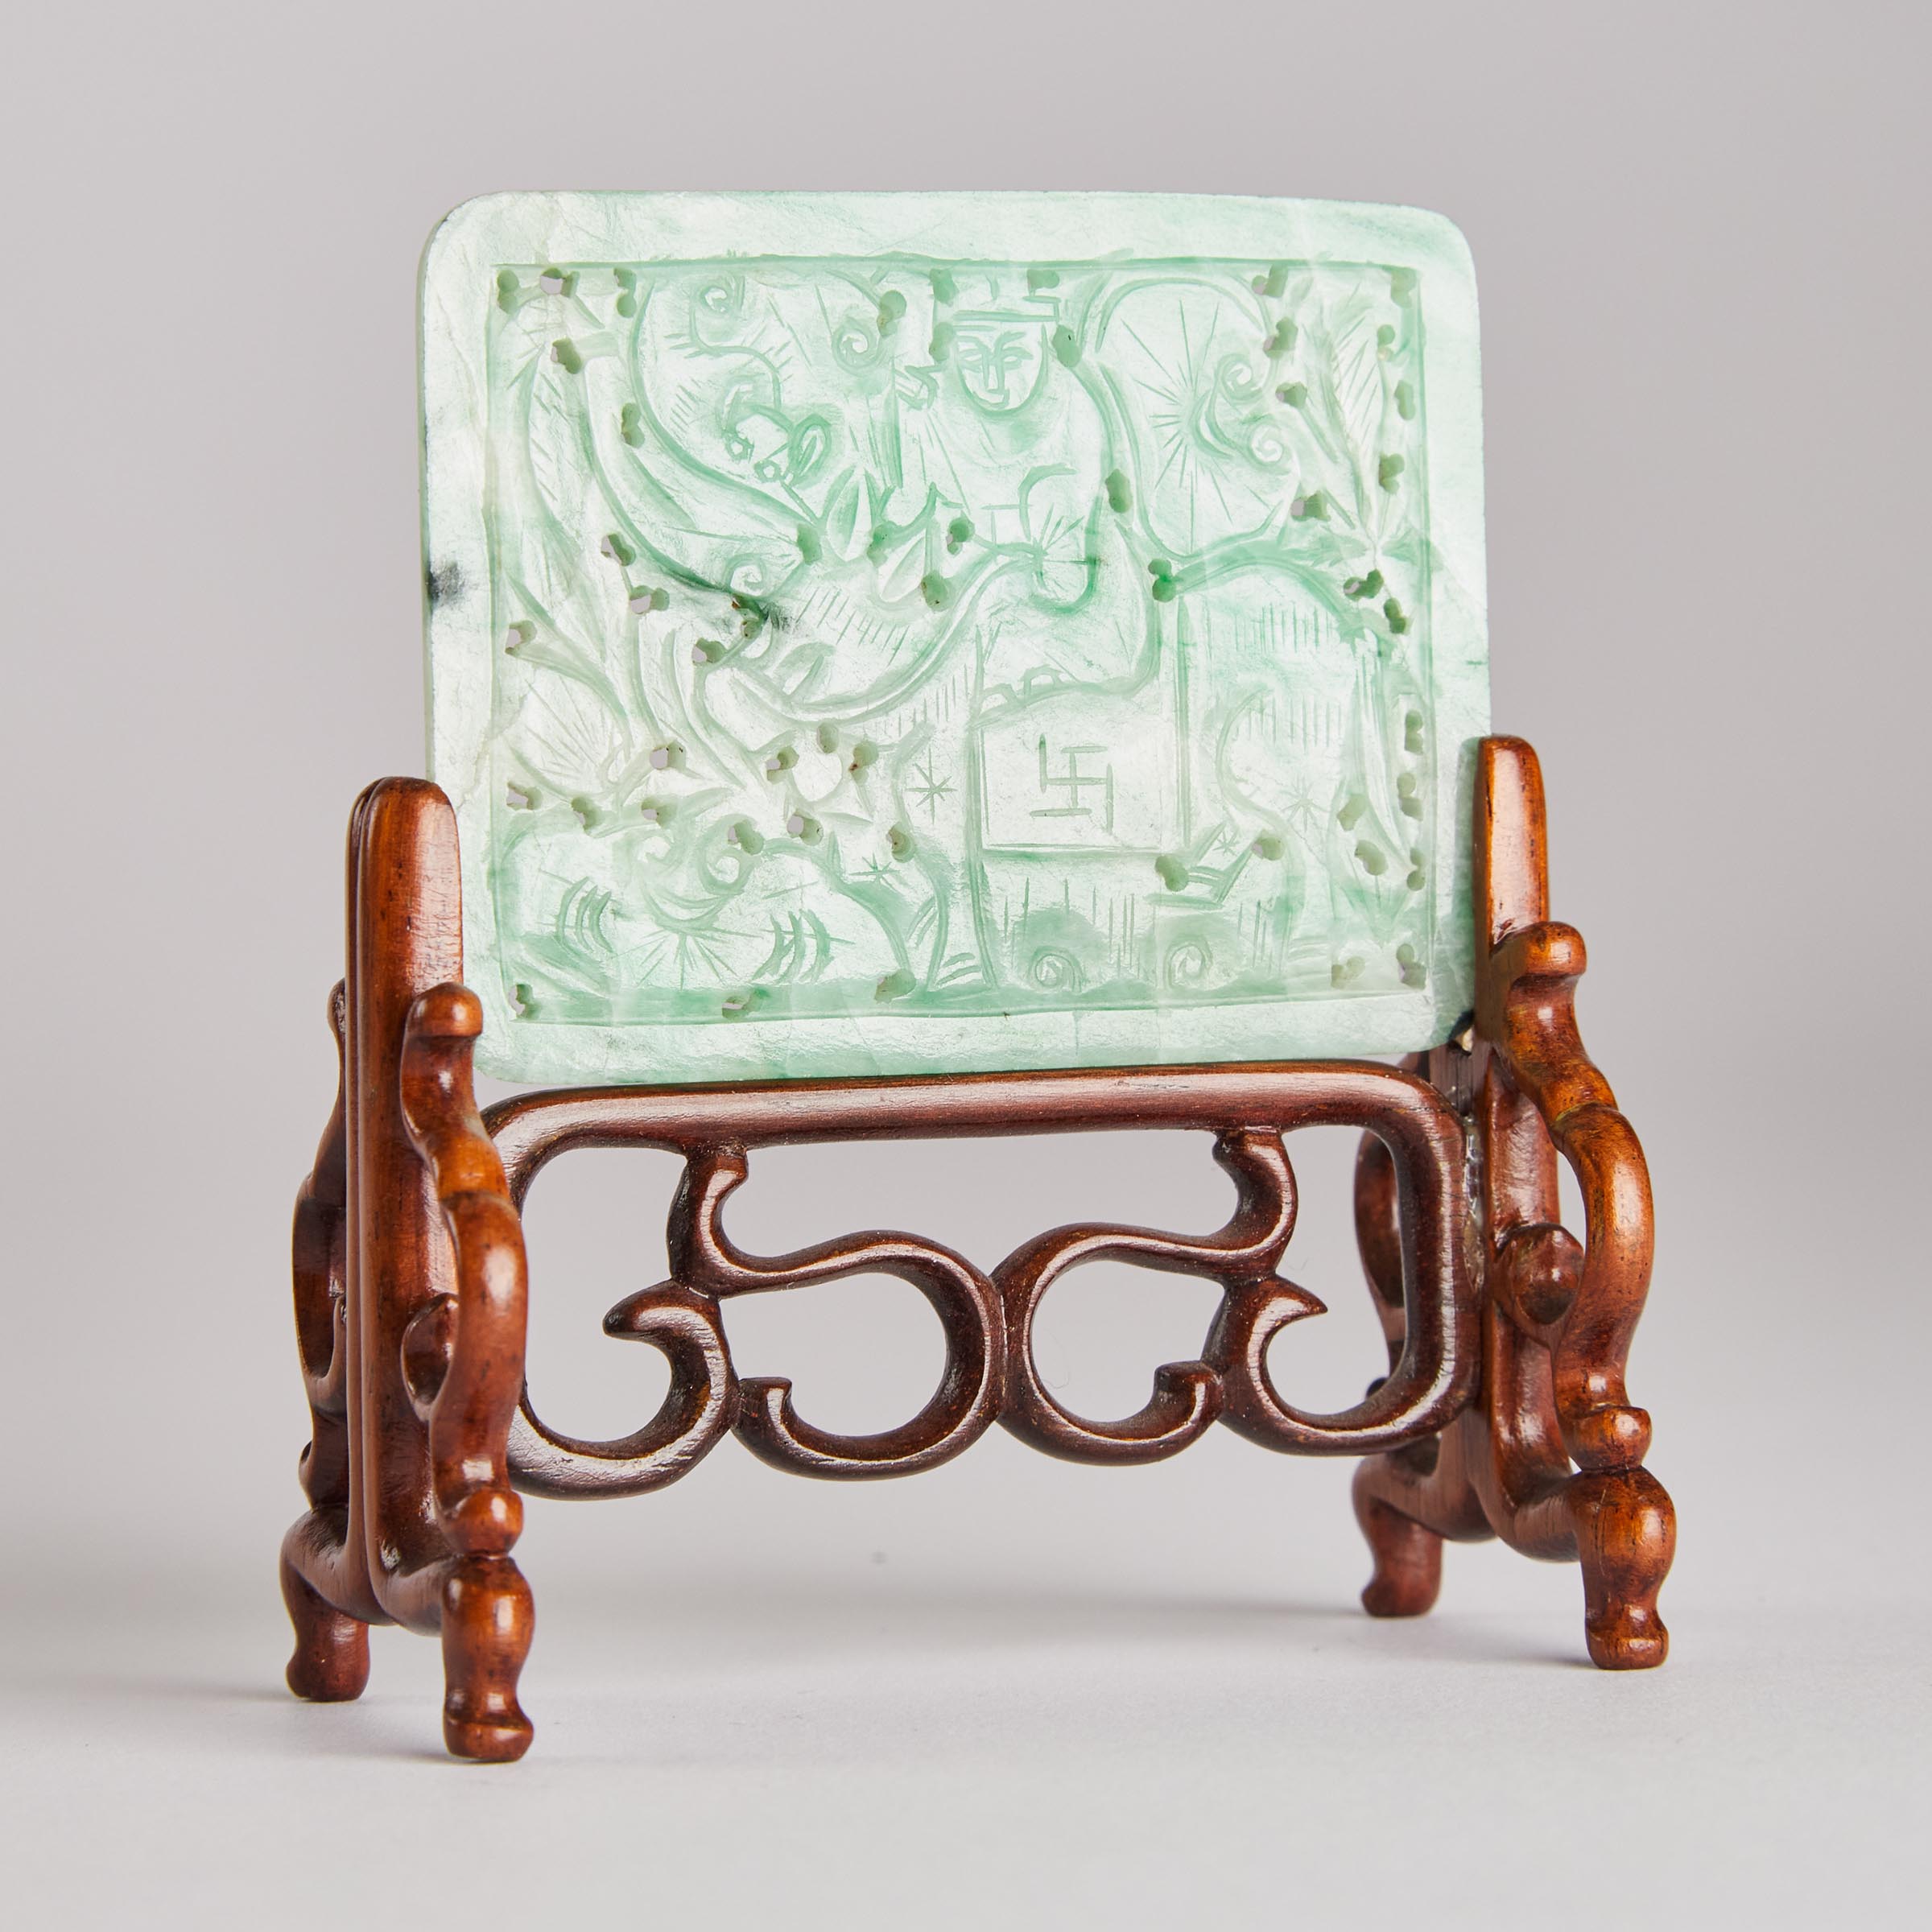 A Small Jadeite Carved Table Screen  3aad2b